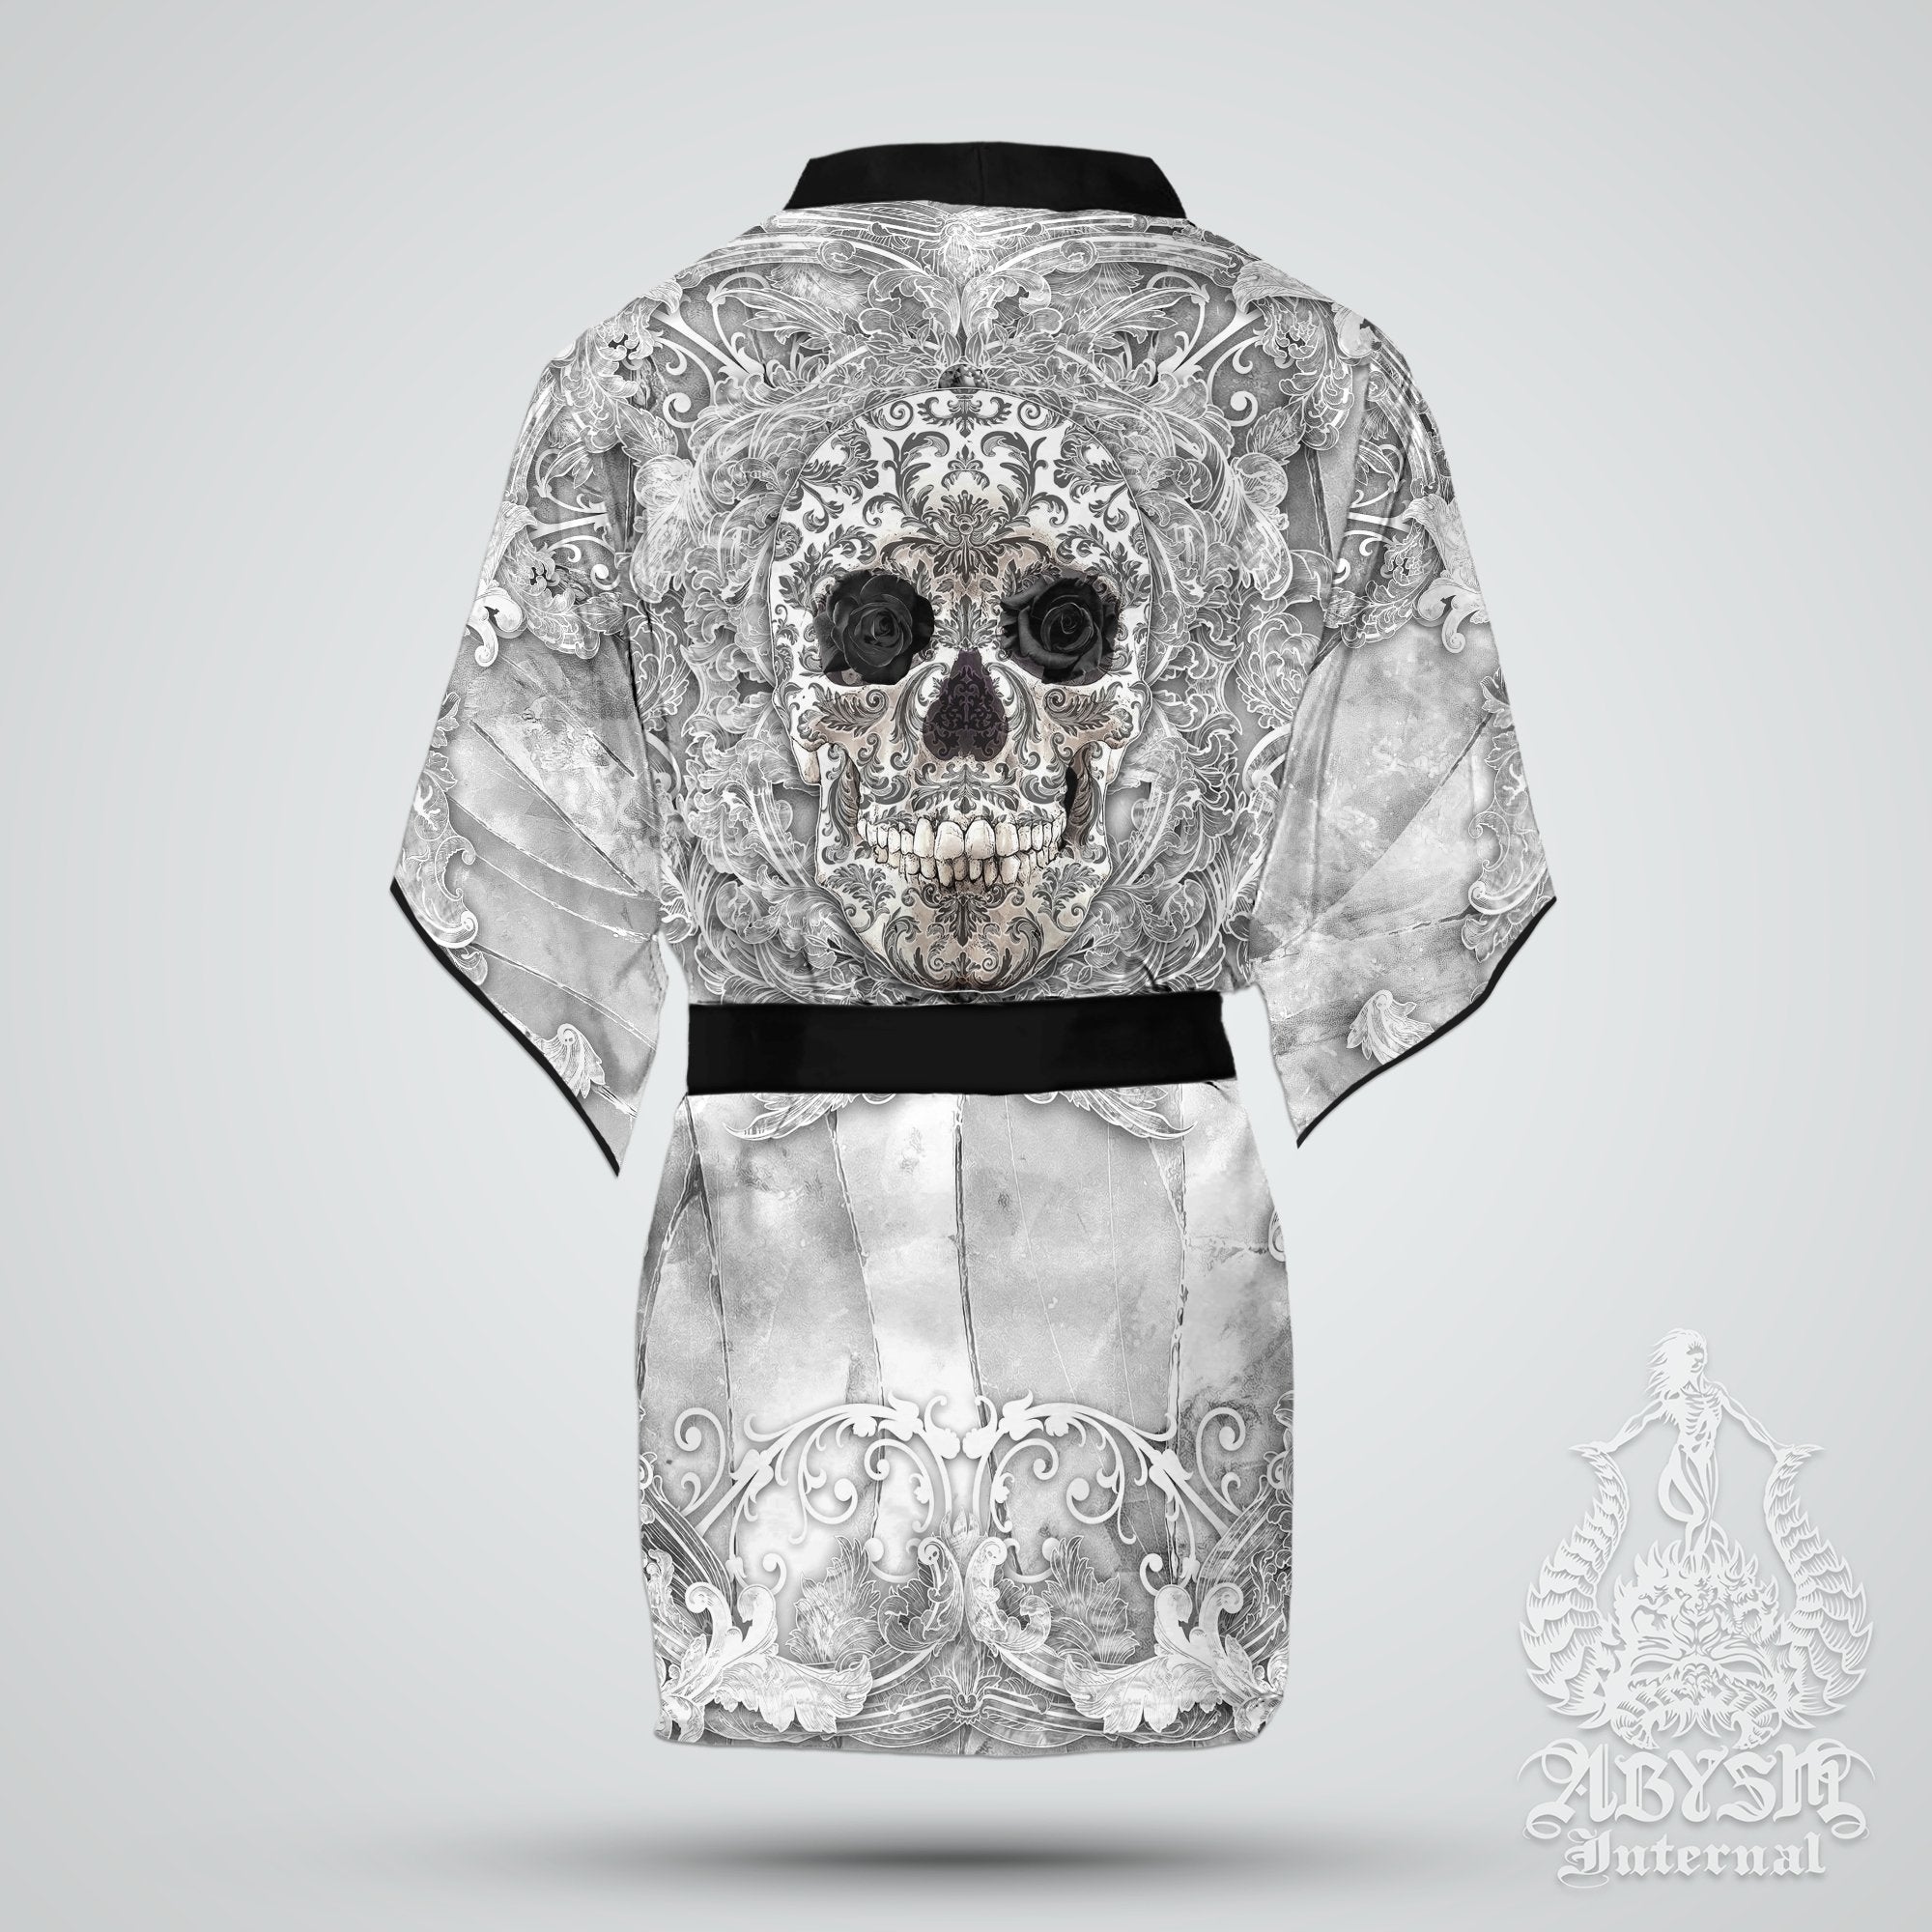 Skull Cover Up, Beach Outfit, Party Kimono, Summer Festival Robe, Gothic Indie and Alternative Clothing, Unisex - White Goth - Abysm Internal